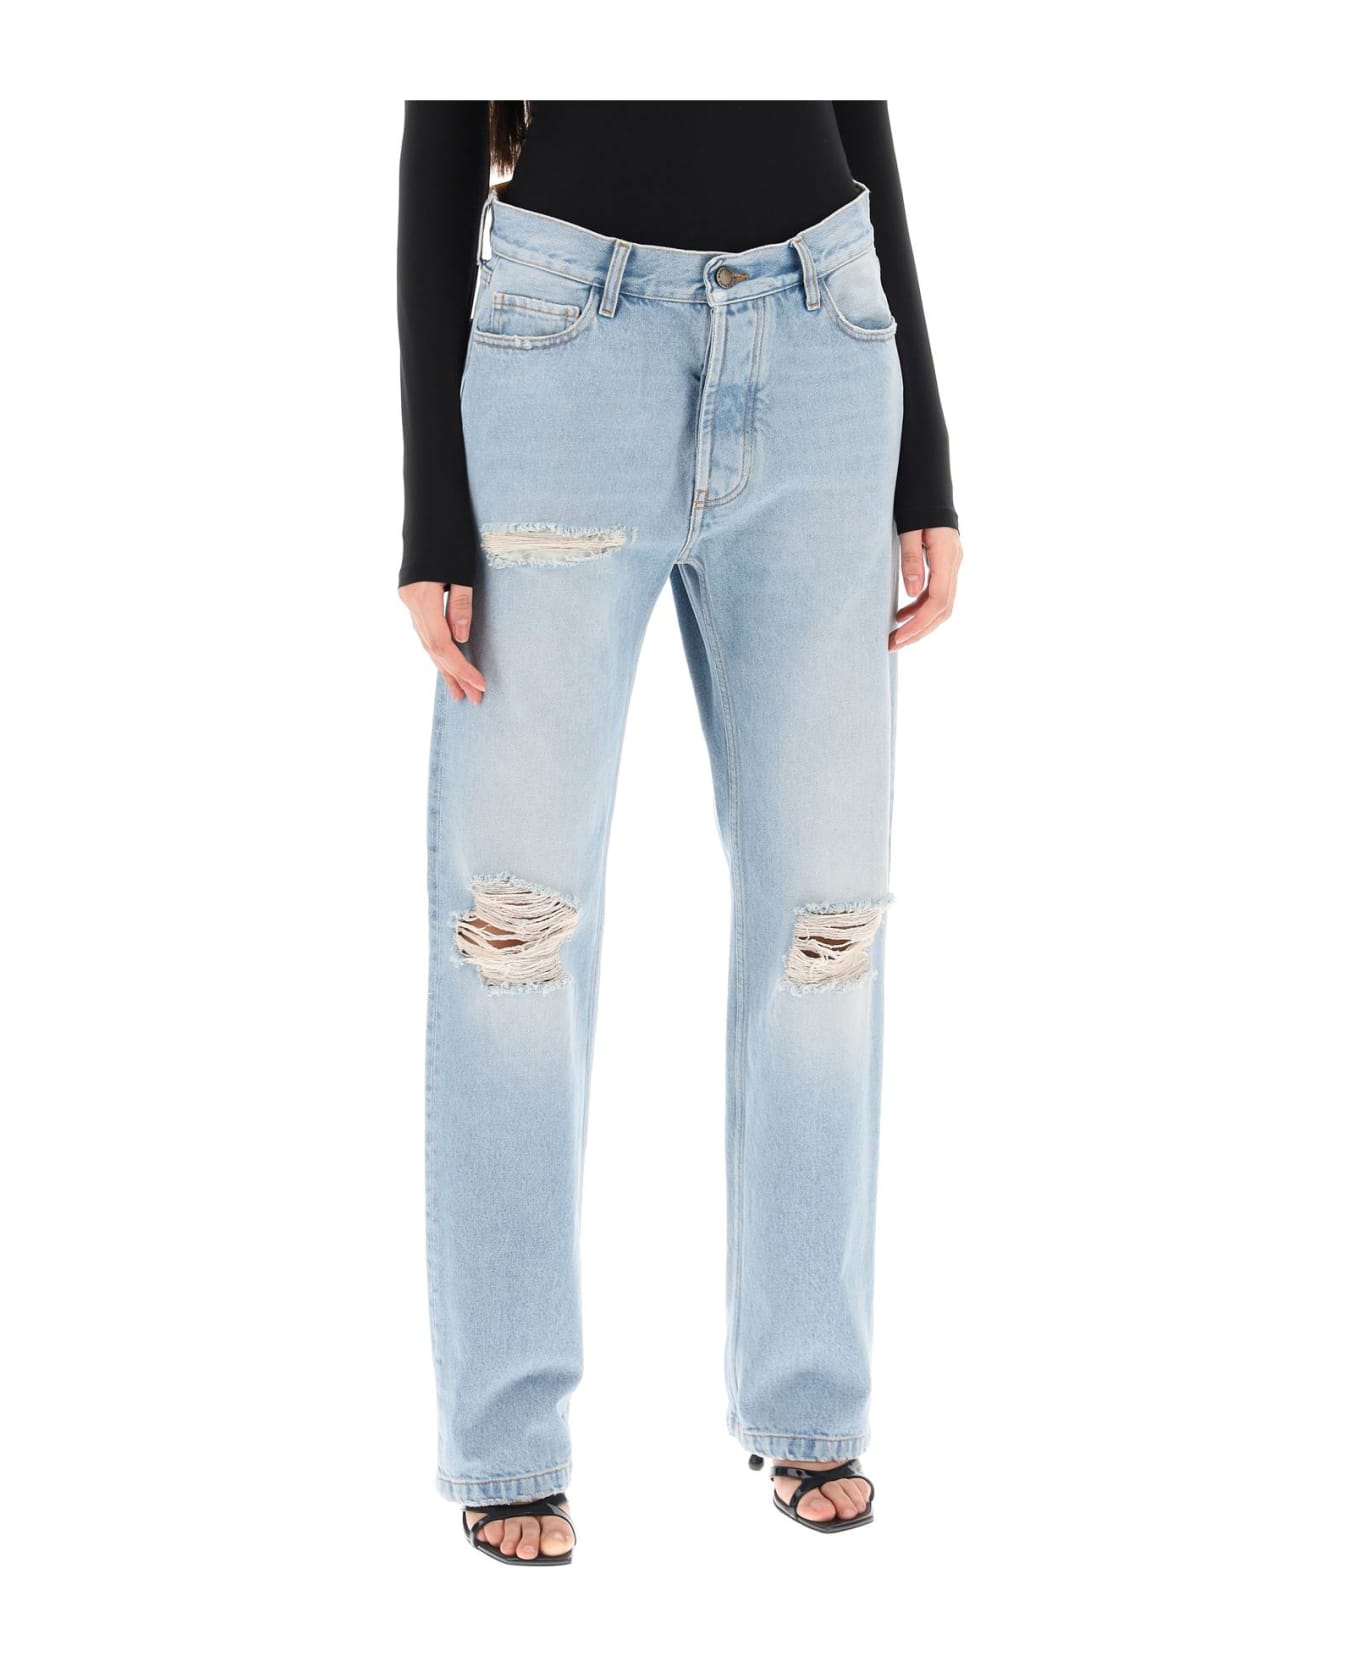 DARKPARK Naomi Jeans With Rips And Cut Outs - BLUE